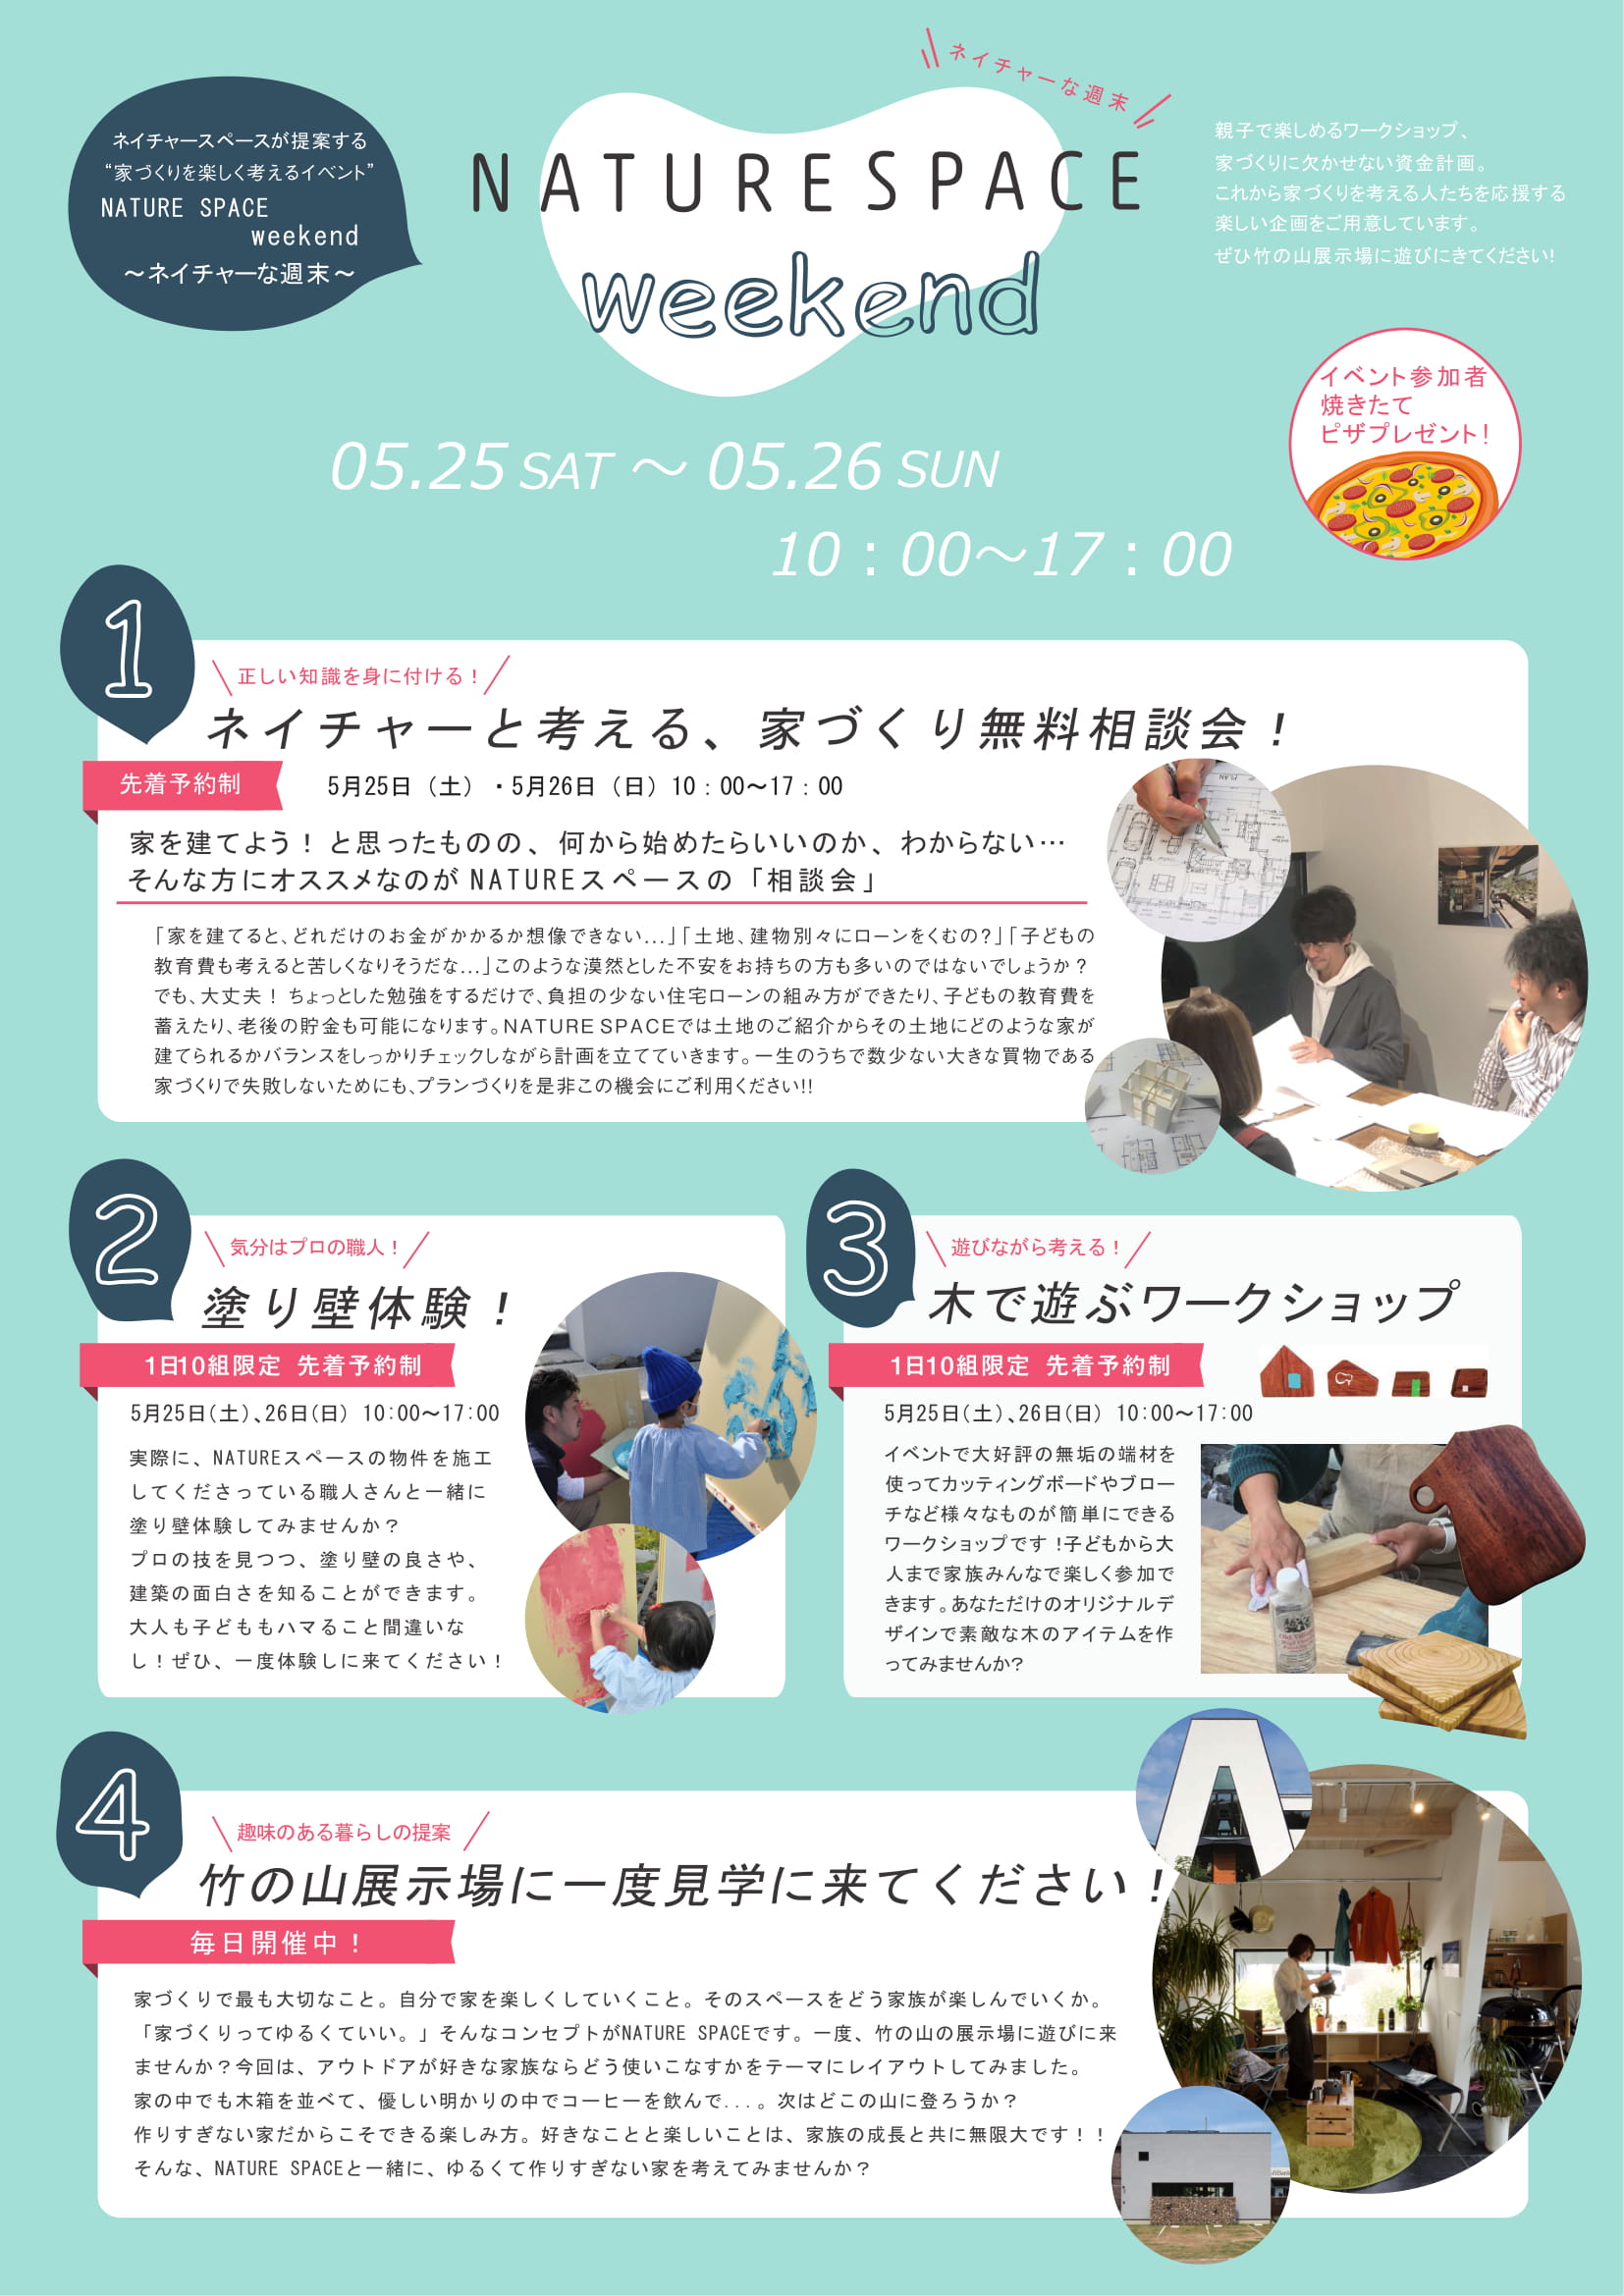 NATURE SPACE Weekend　～ネイチャーな週末～開催！！